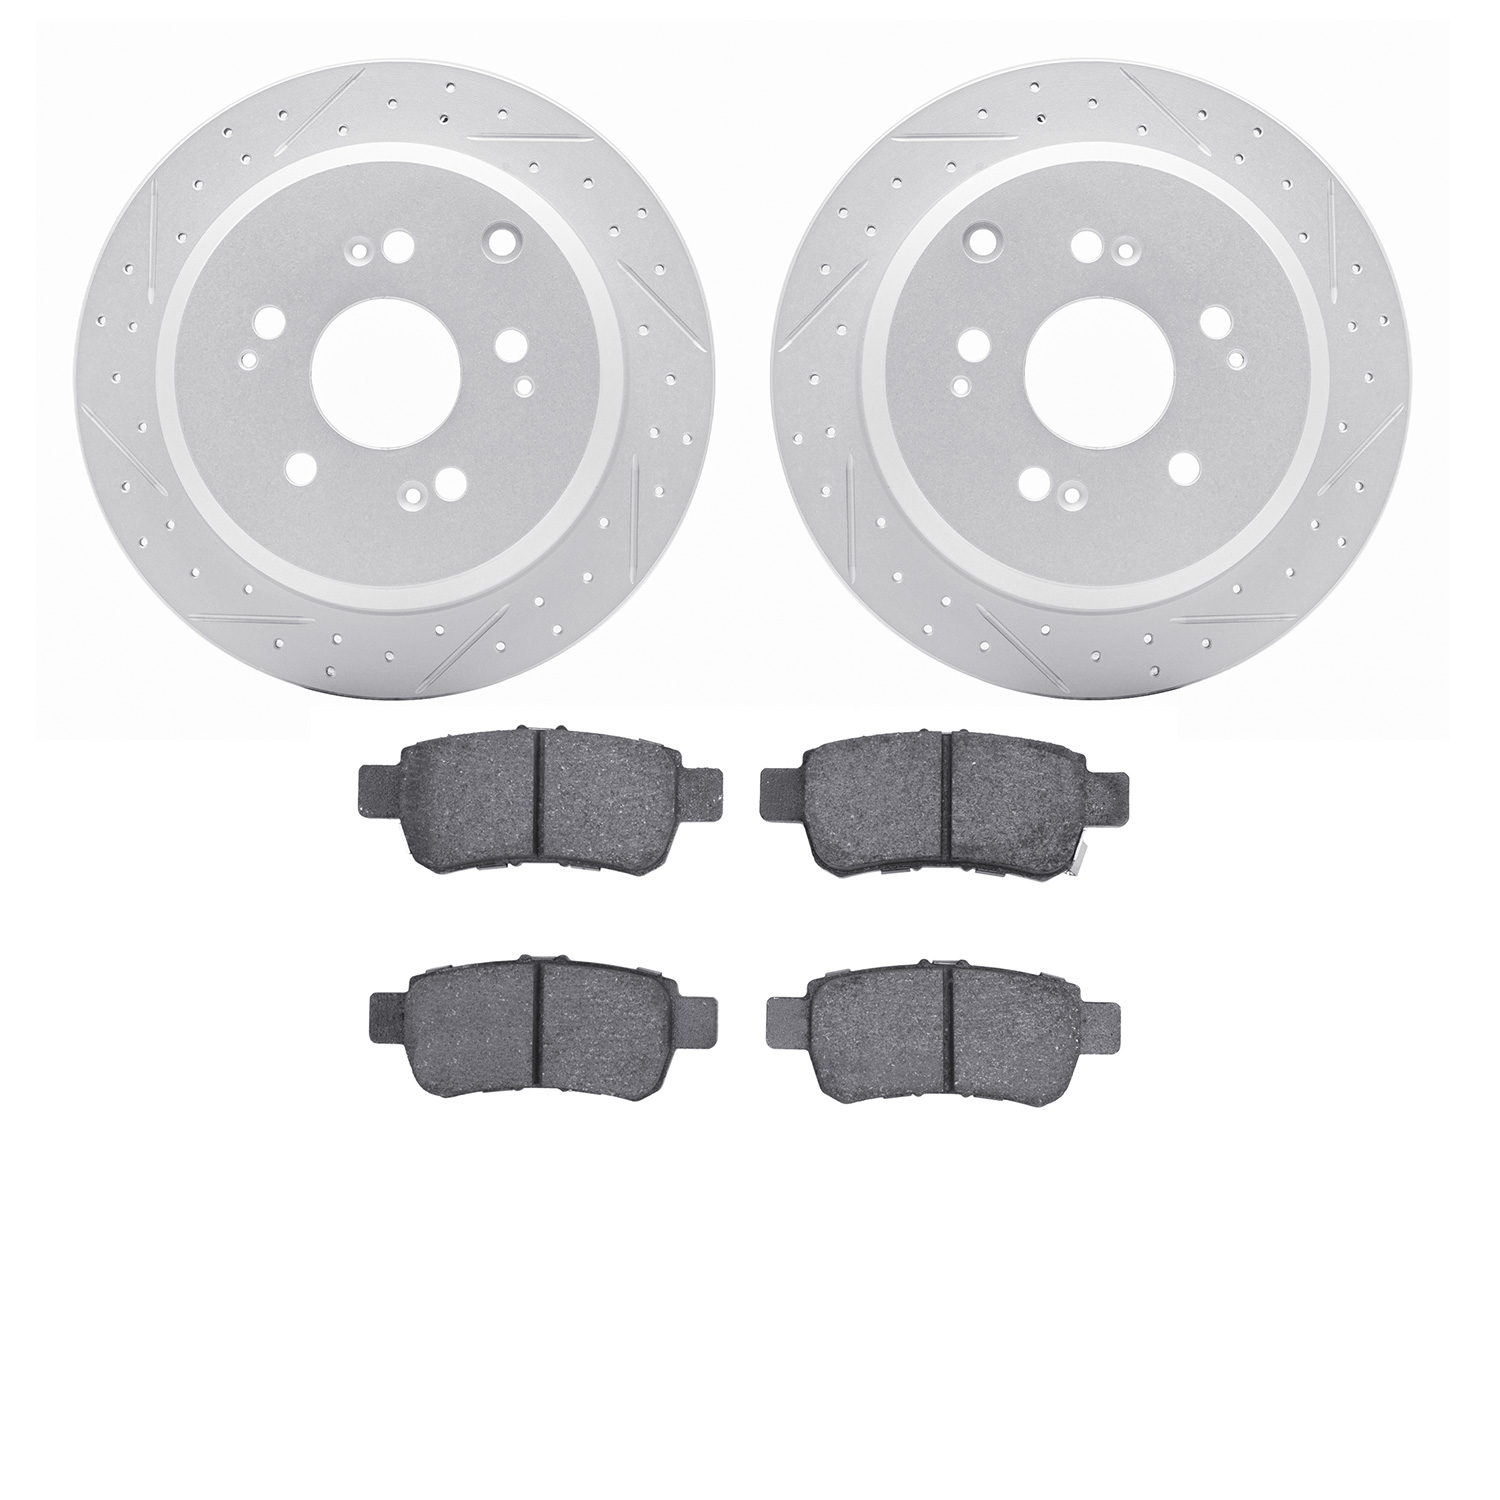 2502-59070 Geoperformance Drilled/Slotted Rotors w/5000 Advanced Brake Pads Kit, 2005-2010 Acura/Honda, Position: Rear